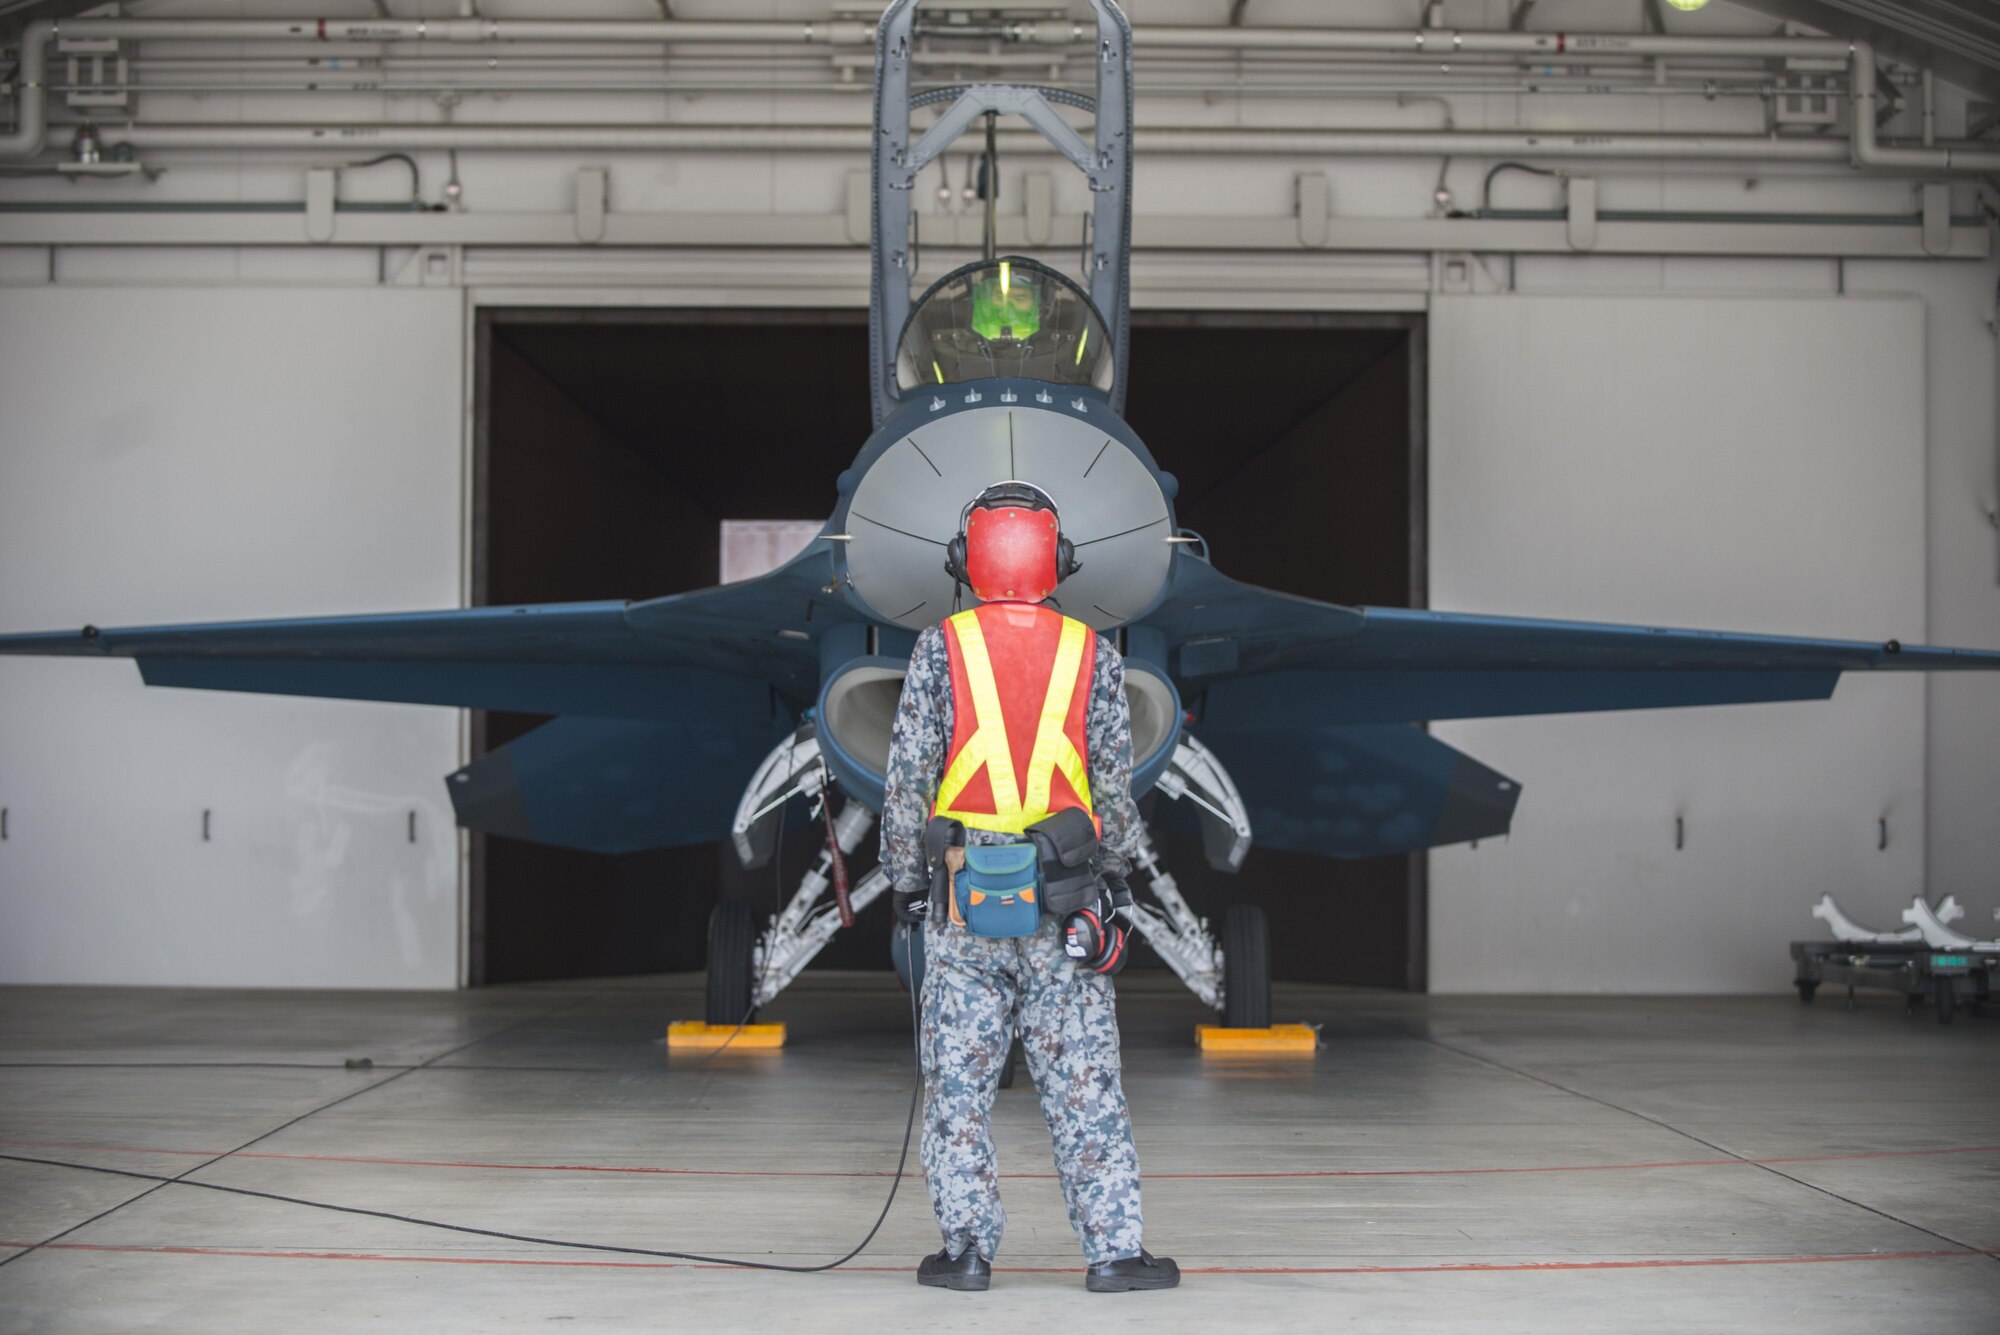 A crew chief with the 3rd Fighter Squadron runs pre-flight checks at Misawa Air Base, Japan, June 22, 2016. U.S. Air Force Col. Timothy Sundvall, the commander of the 35th Fighter Wing was invited to fly in an F-2A with the 3rd FS, marking his first time flying in this aircraft. (U.S. Air Force photo by Senior Airman Brittany A. Chase)